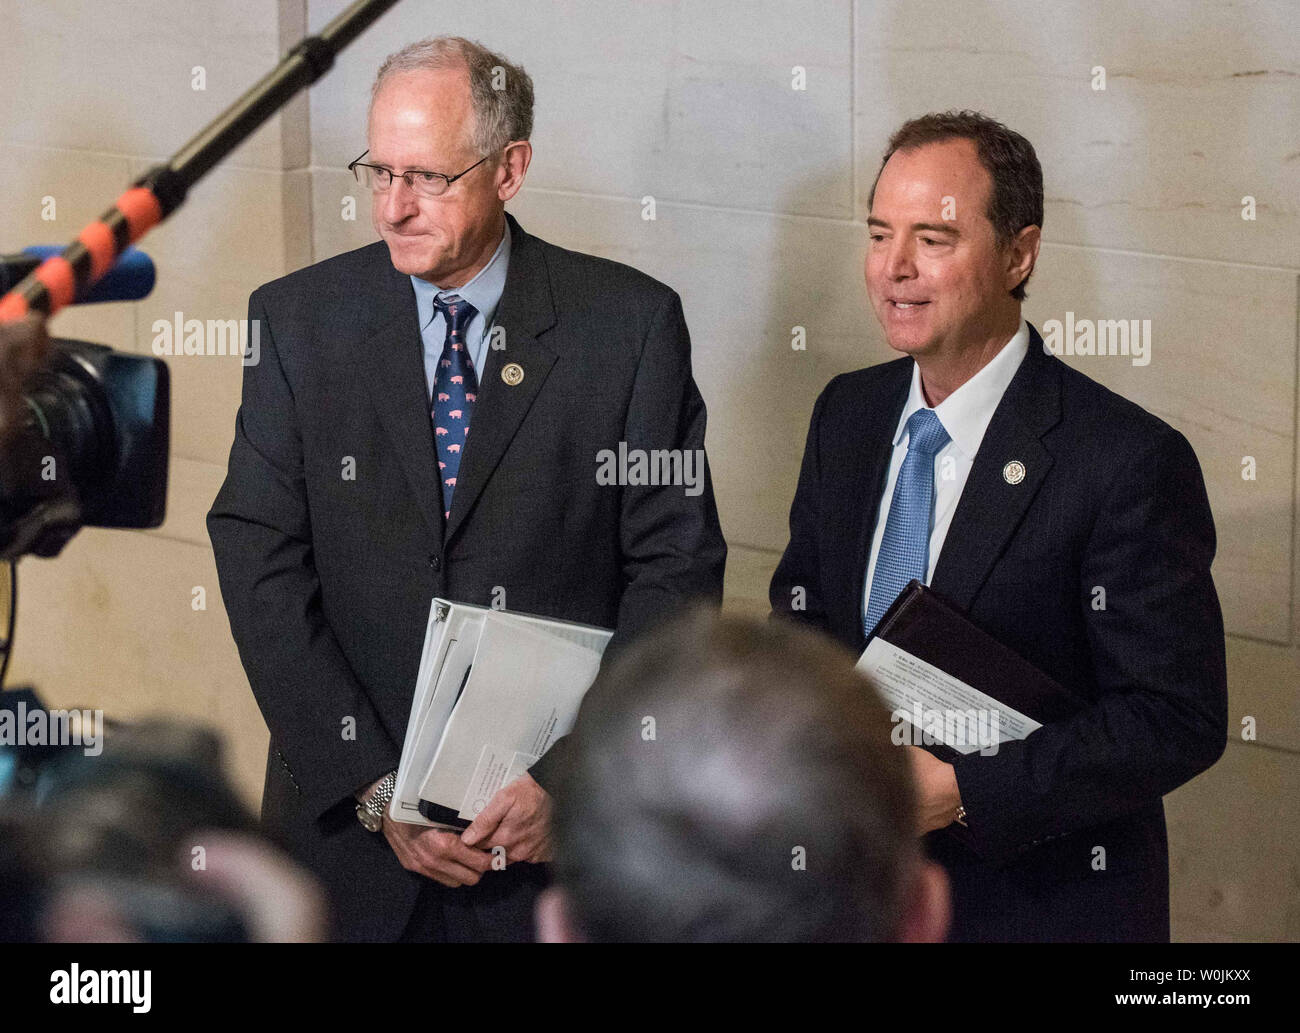 Representatives Mike Conaway (R-TX), left, and Adam Schiff, (D-CA), right, talk with reporters following Jared Kushner, President Trump's son-in-law and senior advisor's meeting on Capitol Hill and met with House Intelligence Committee on his contacts with Russian officials during the general election, at the Capitol Building in Washington, D.C. on July 25, 2017. The Committee is investigating any wrongdoing or collusion between the Trump campaign and the Russians during the 2016 presidential election.     Photo by Ken Cedeno/UPI Stock Photo